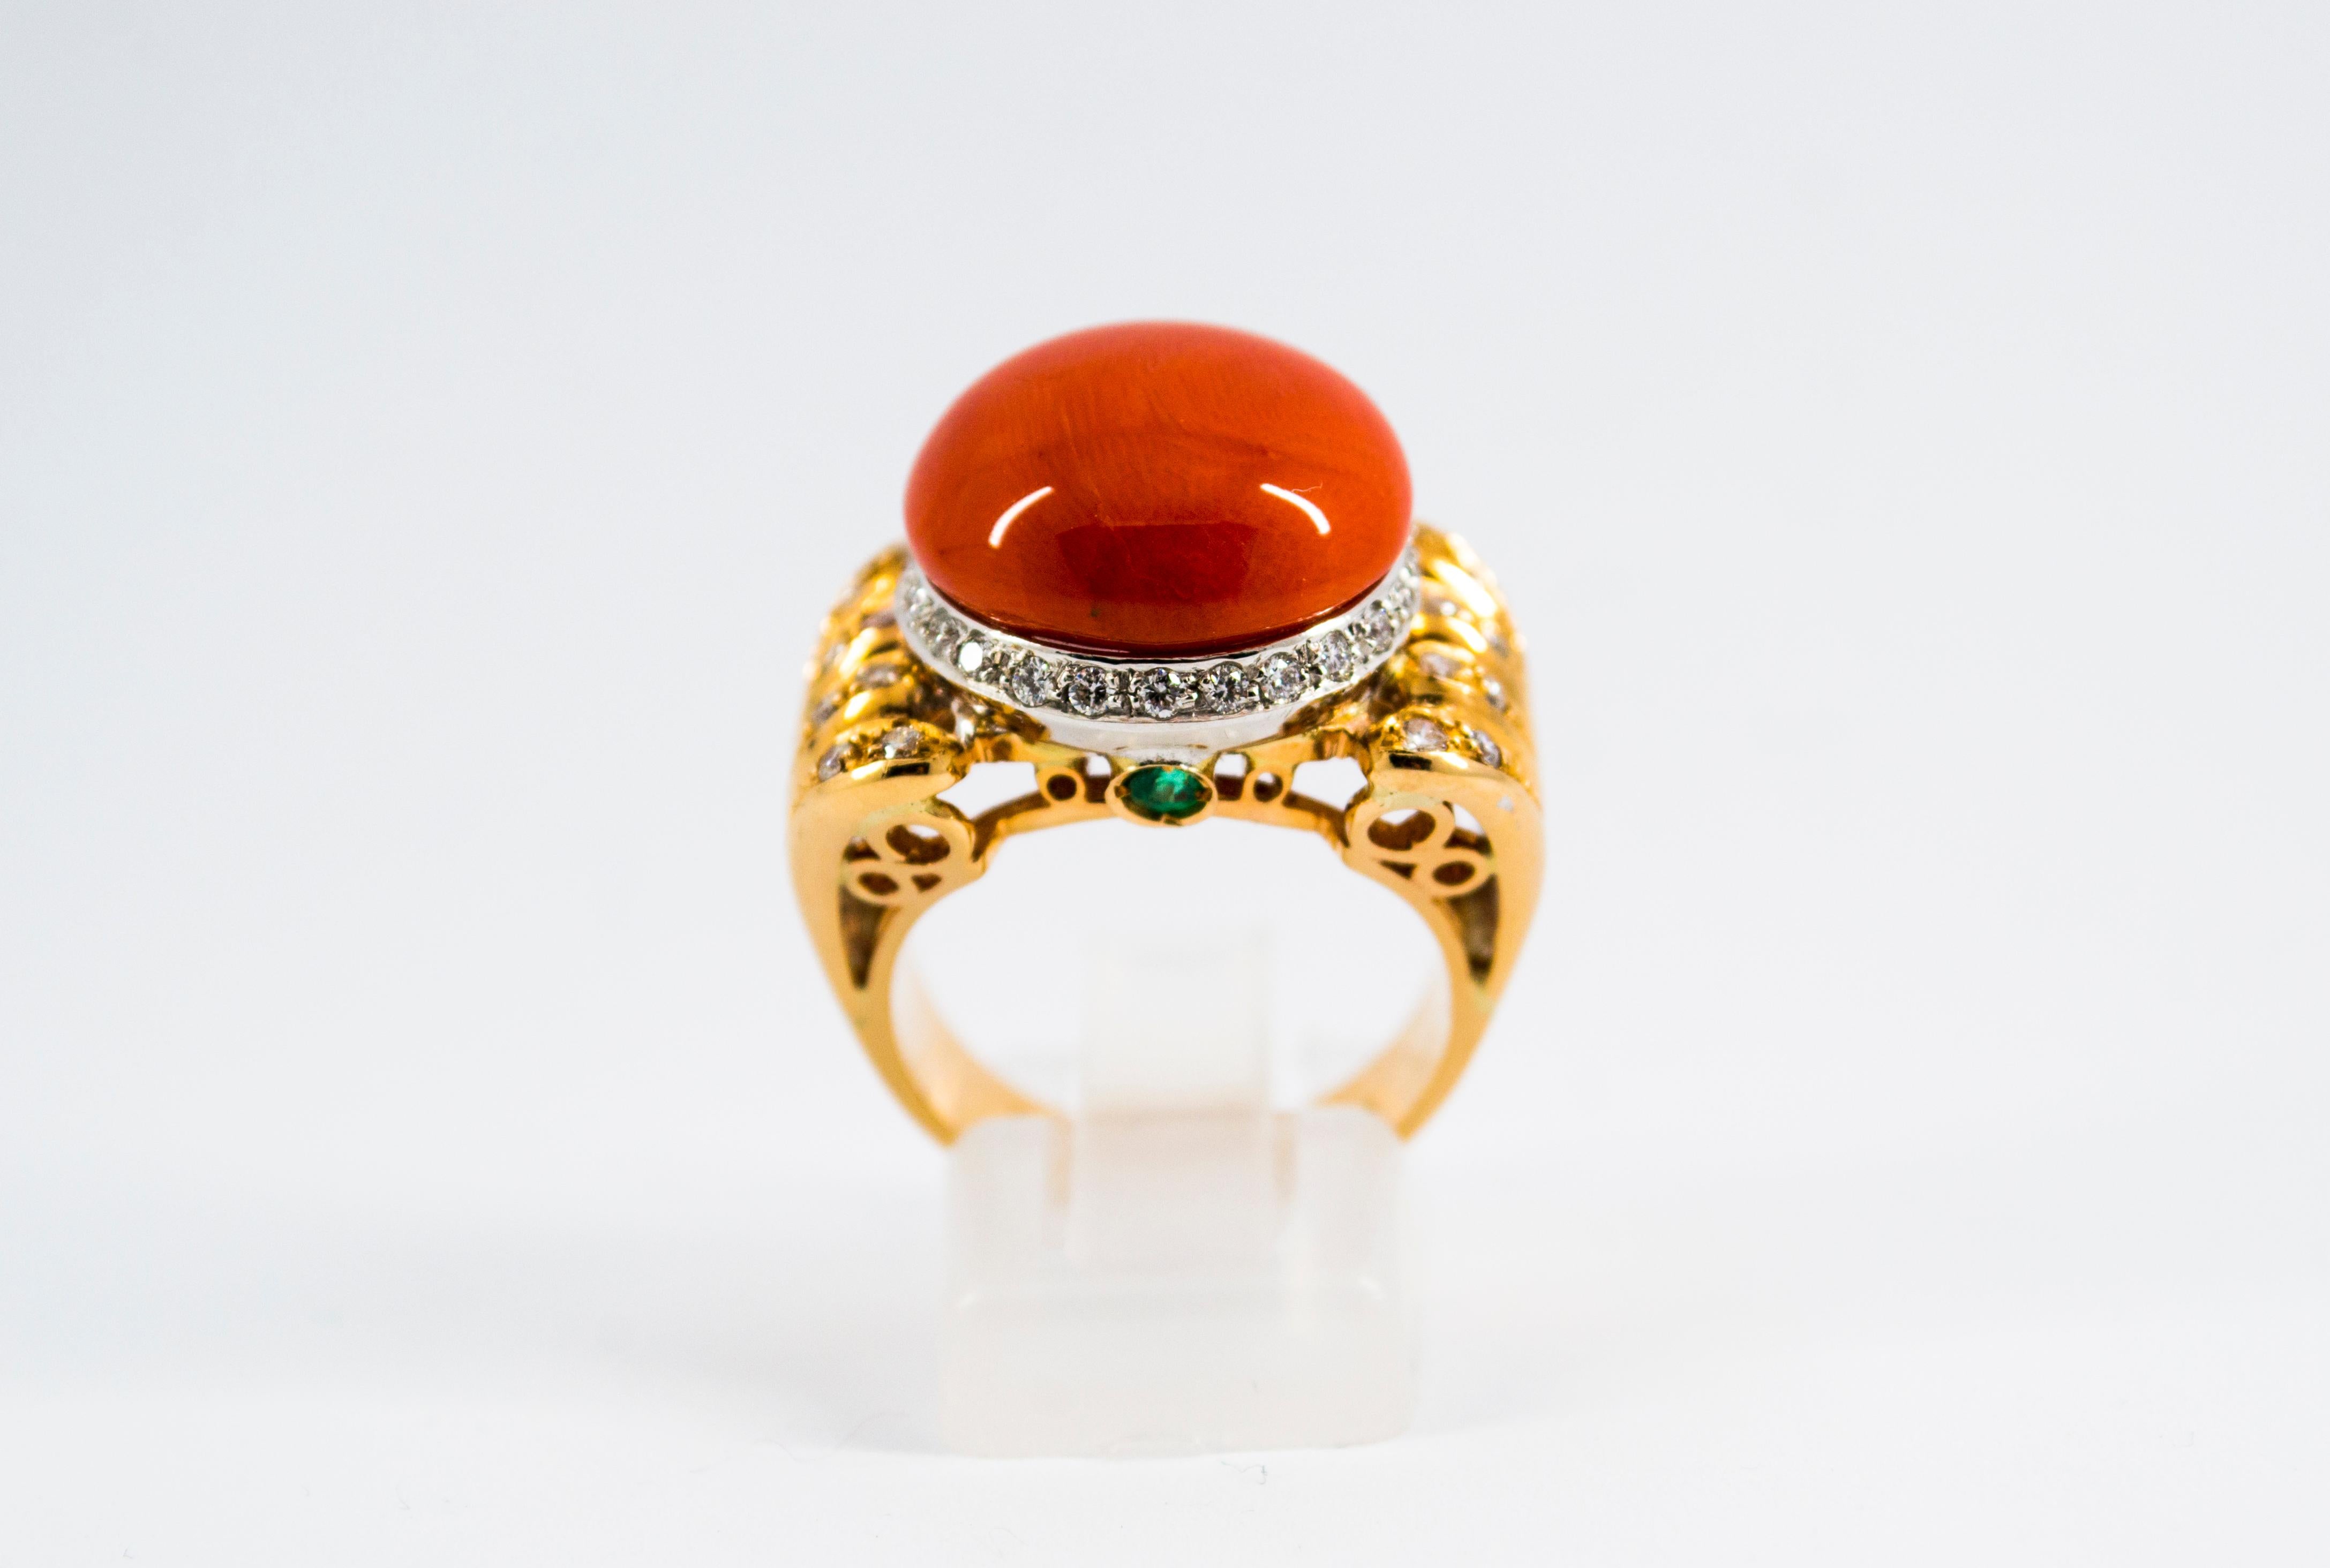 This Ring is made of 14K Yellow Gold.
This Ring has 0.70 Carats of White Diamonds.
This Ring has 0.10 Carats of Emeralds.
This Ring has Mediterranean (Sardinia, Italy) Red Coral.
Size ITA: 14 USA: 7 
We're a workshop so every piece is handmade,